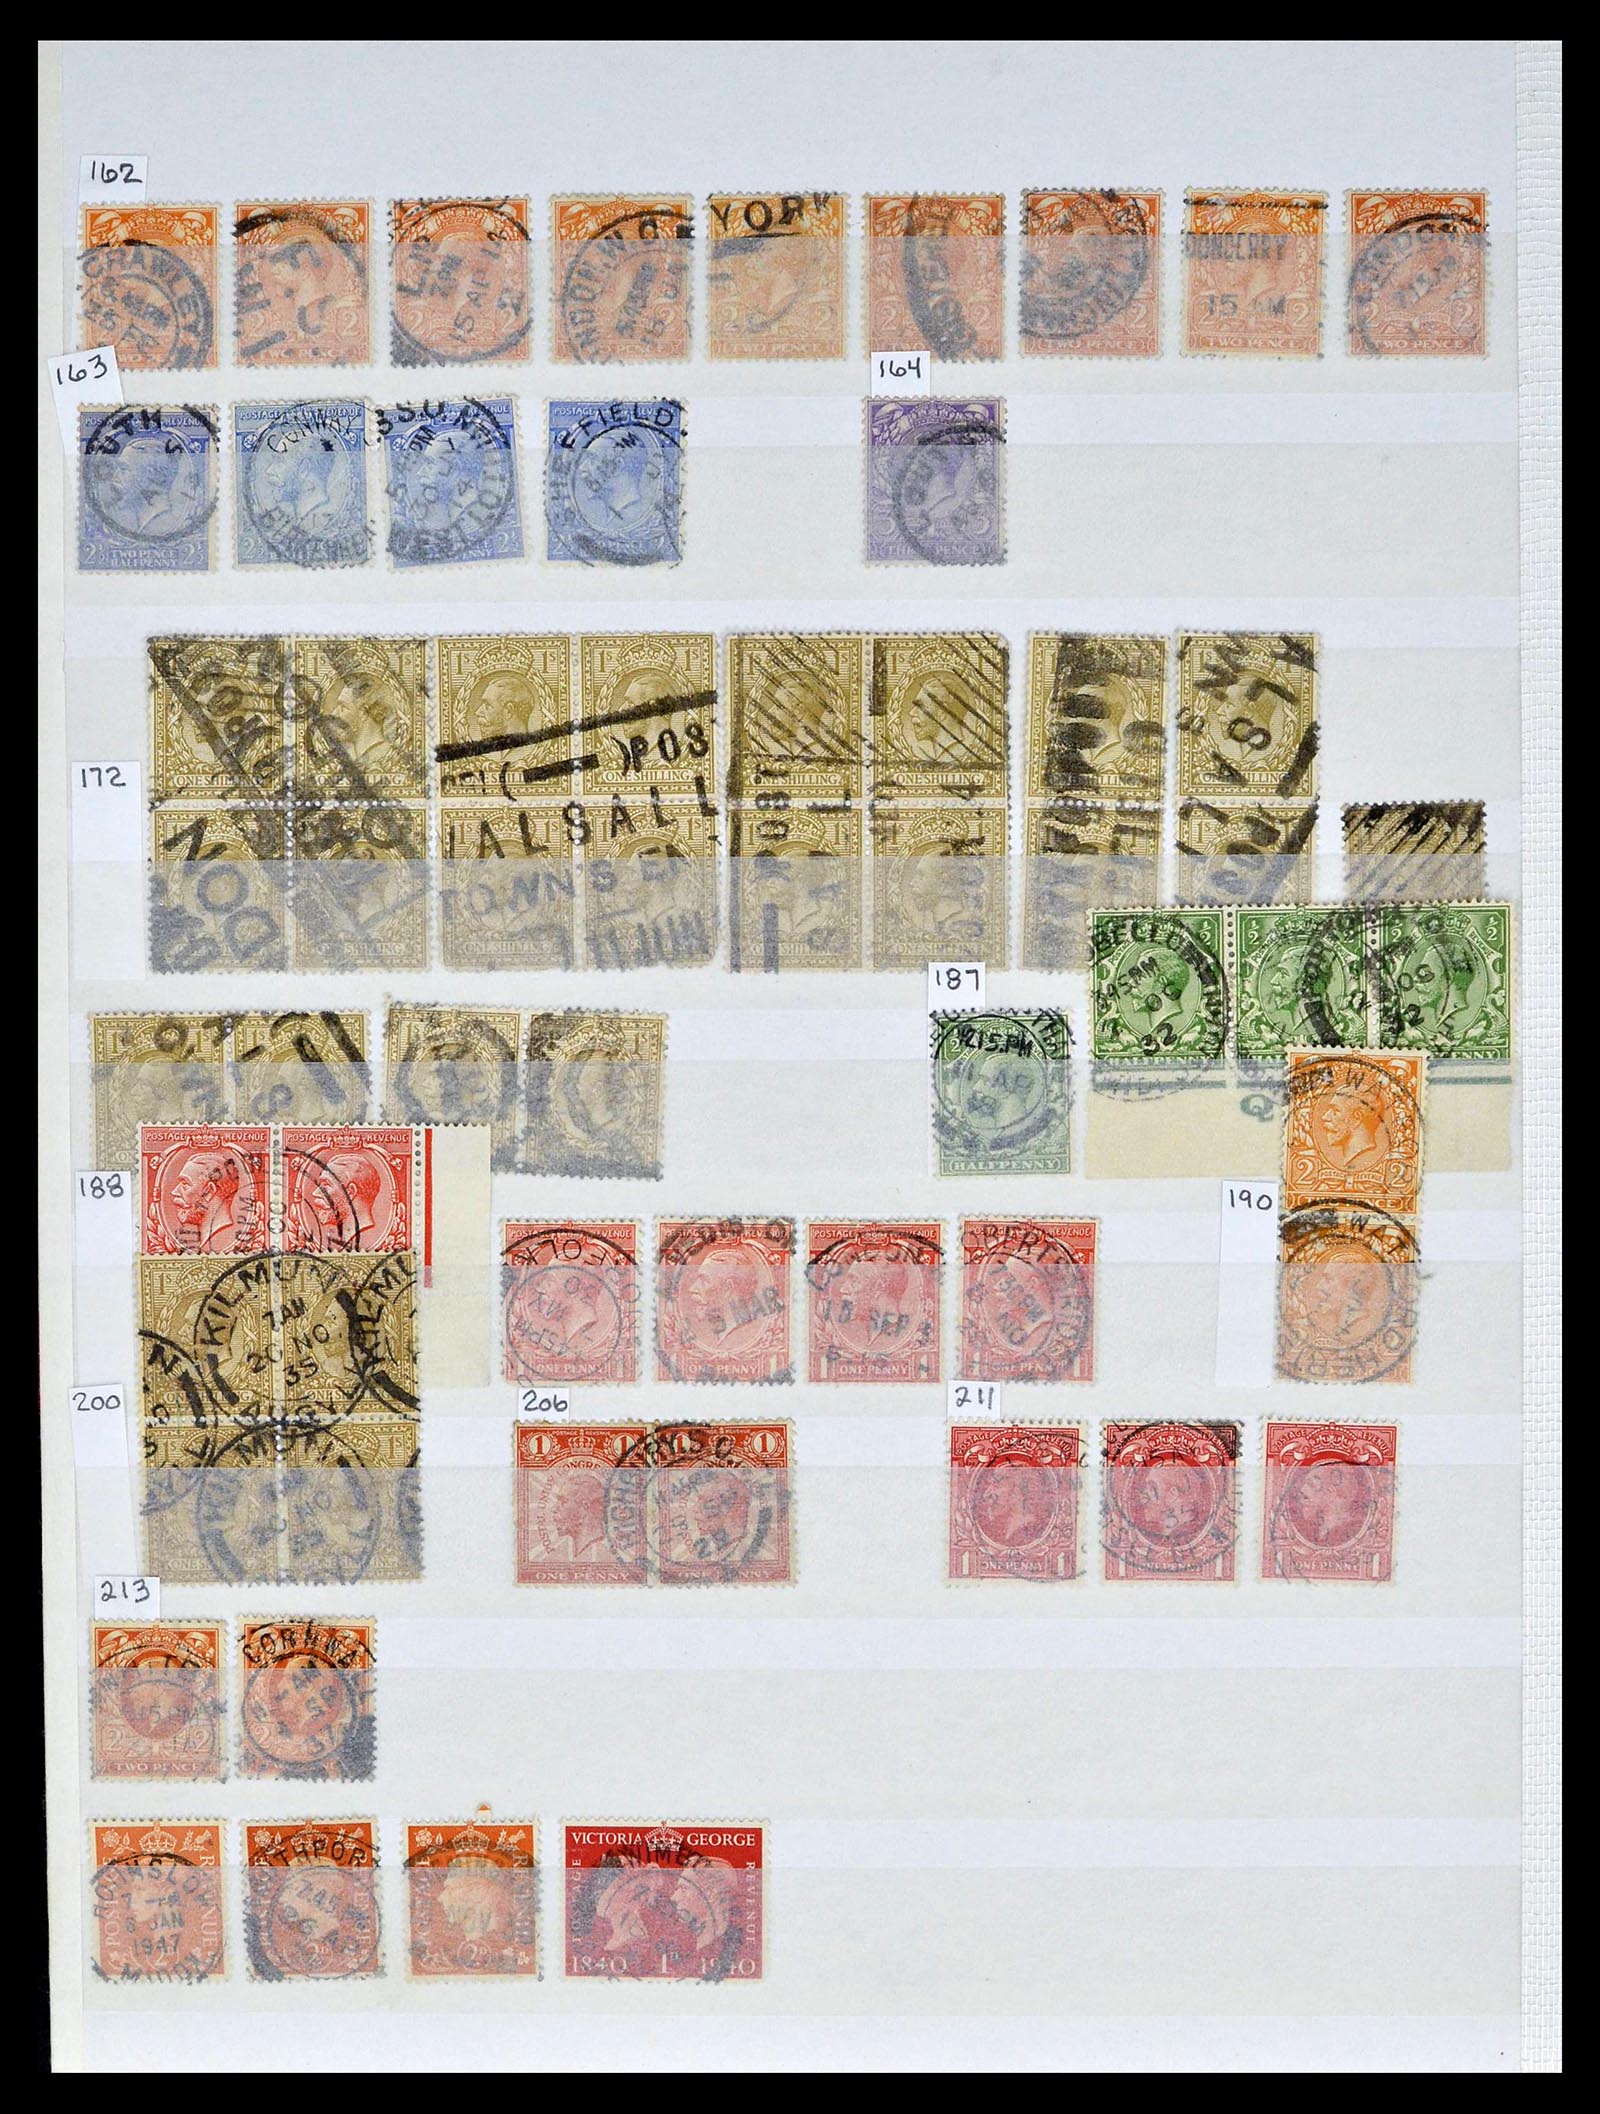 39196 0108 - Stamp collection 39196 Great Britain 1844-1955.